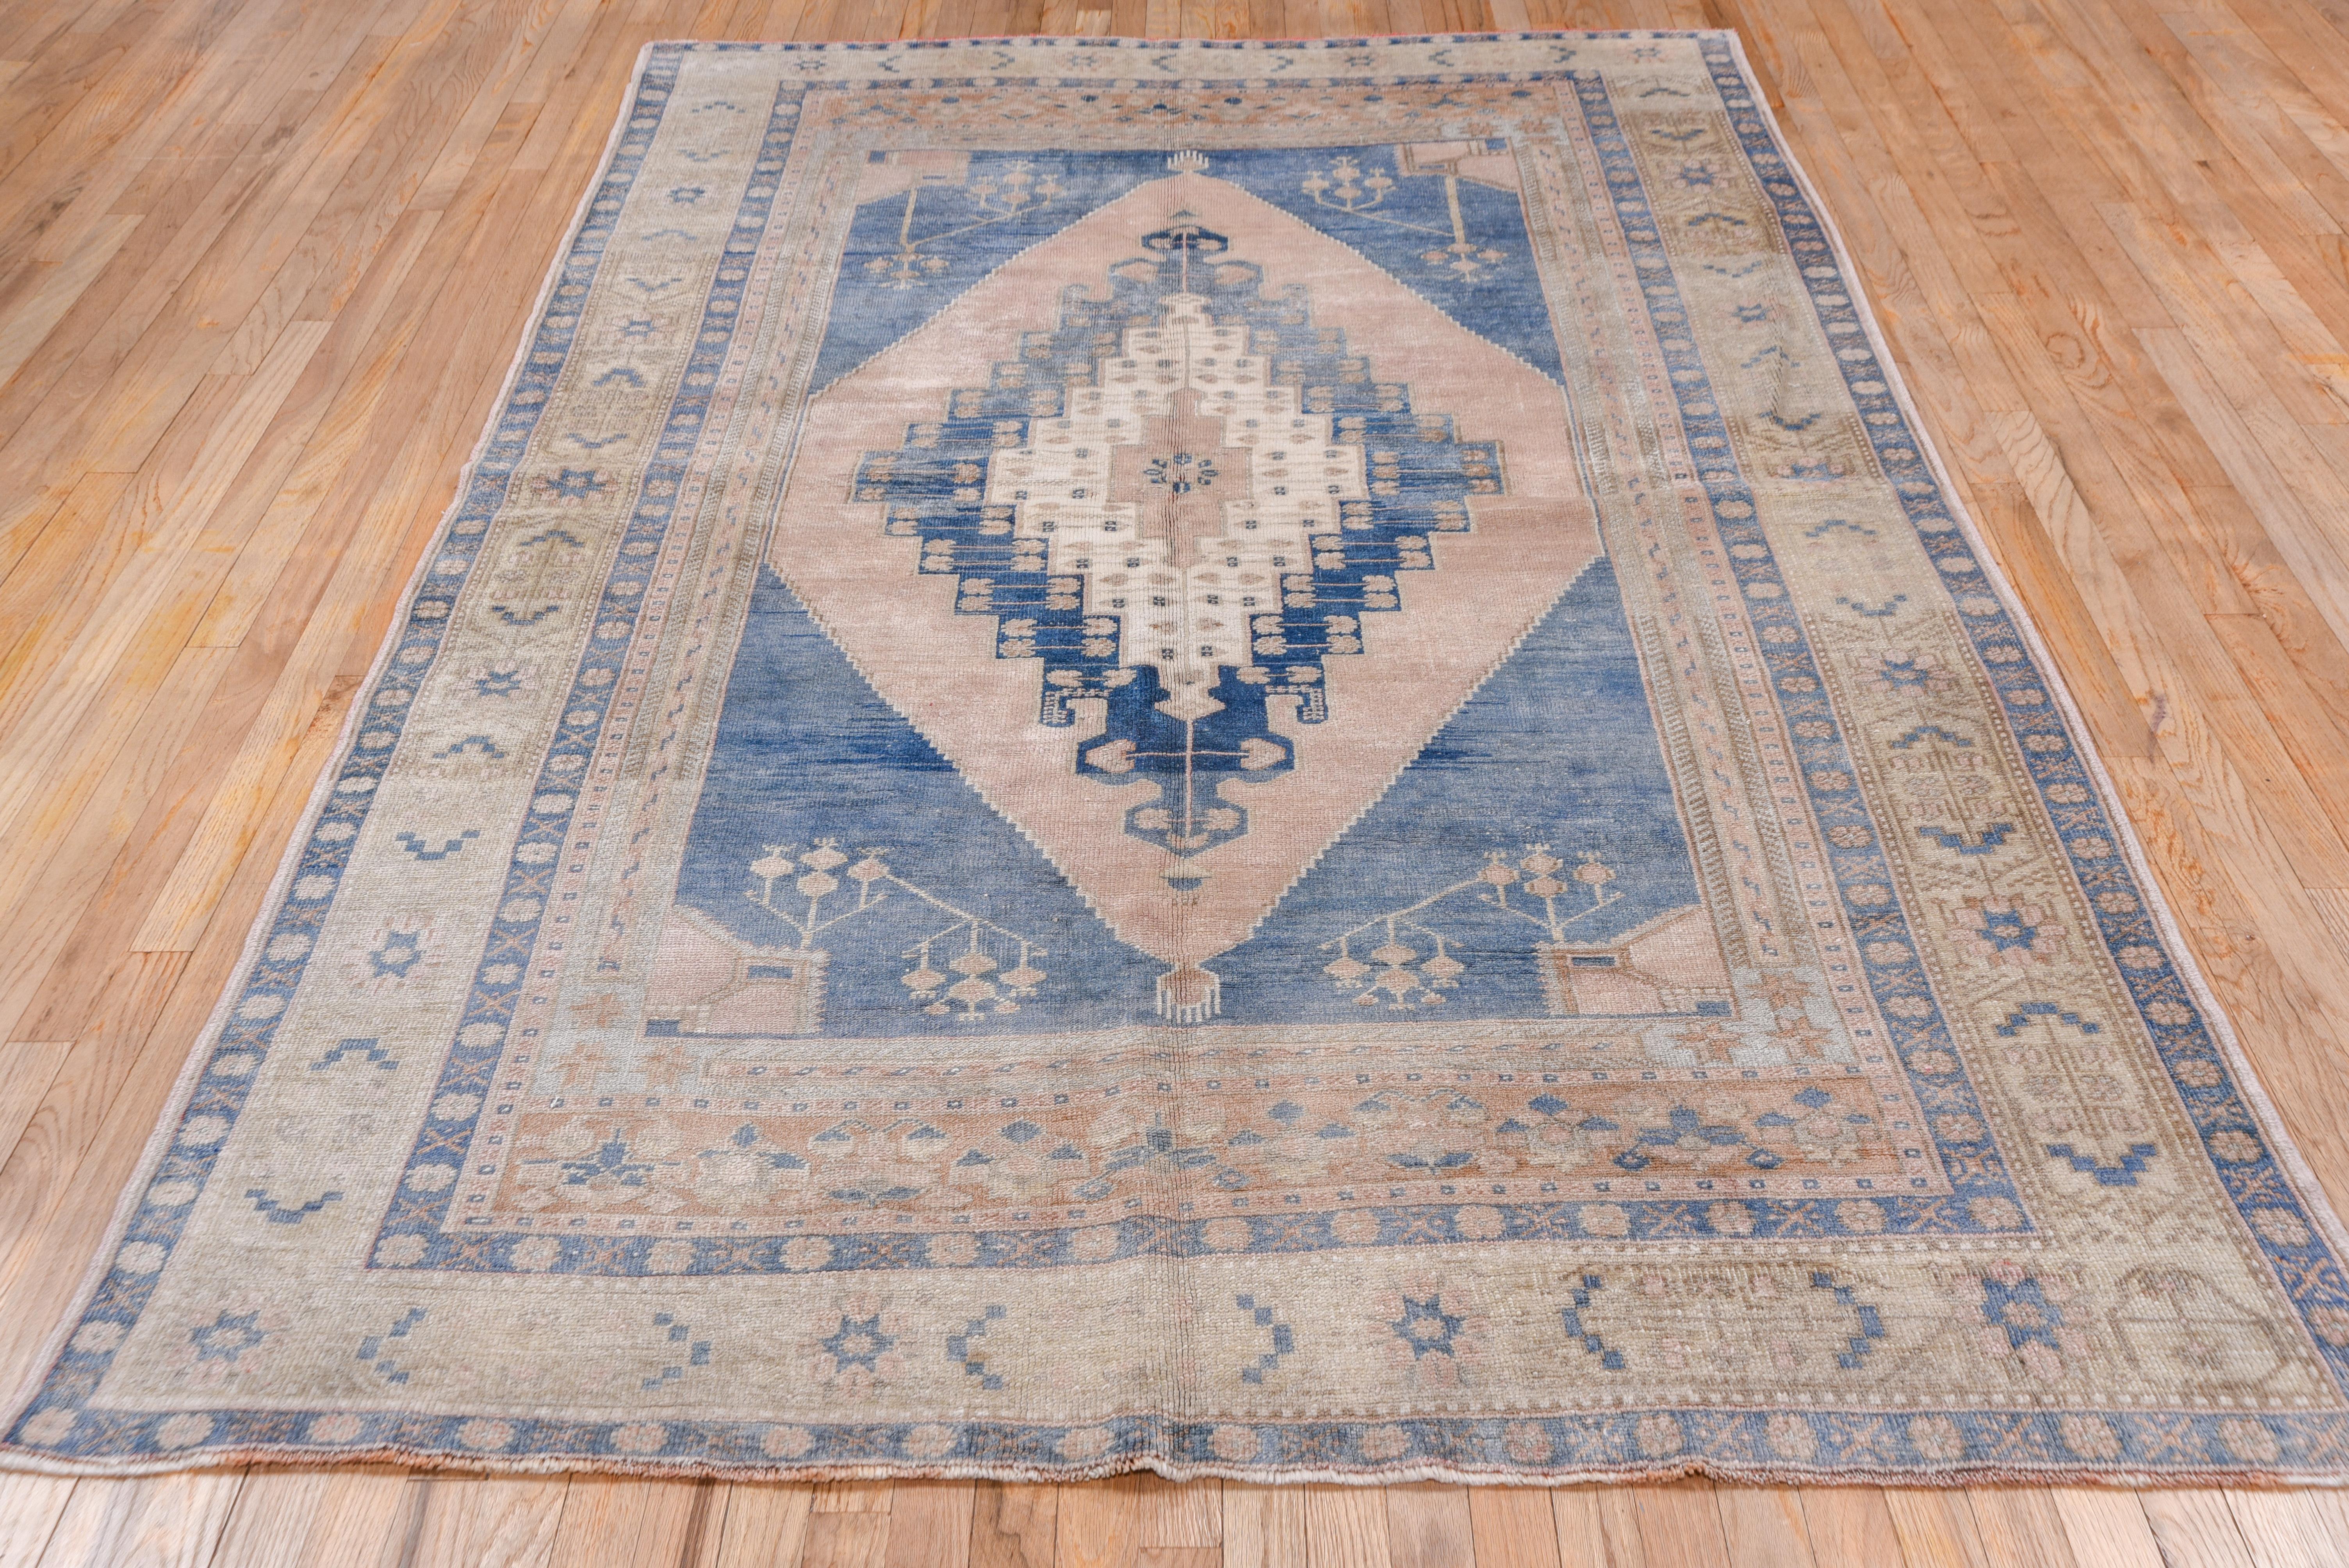 Conjoint light blue connects with floral decor set off the stepped and nested slate blue and ecru tall lozenge medallion on the light buff ground. At each field end of this Anatolian village piece is a floral panel. Bold design with modulated